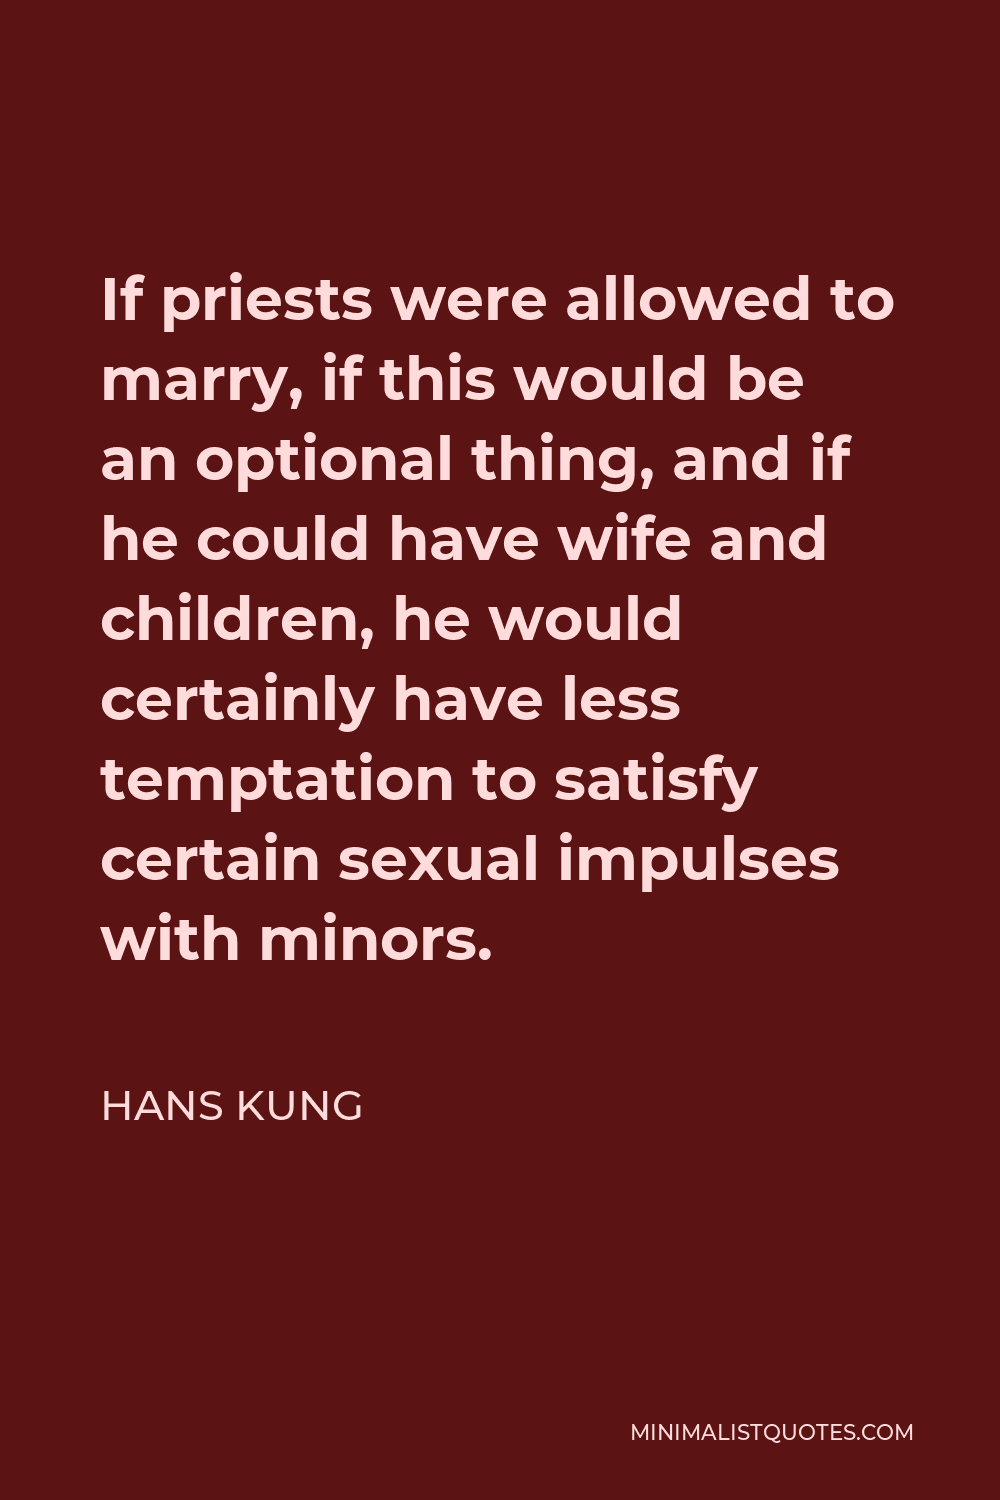 Hans Kung Quote - If priests were allowed to marry, if this would be an optional thing, and if he could have wife and children, he would certainly have less temptation to satisfy certain sexual impulses with minors.